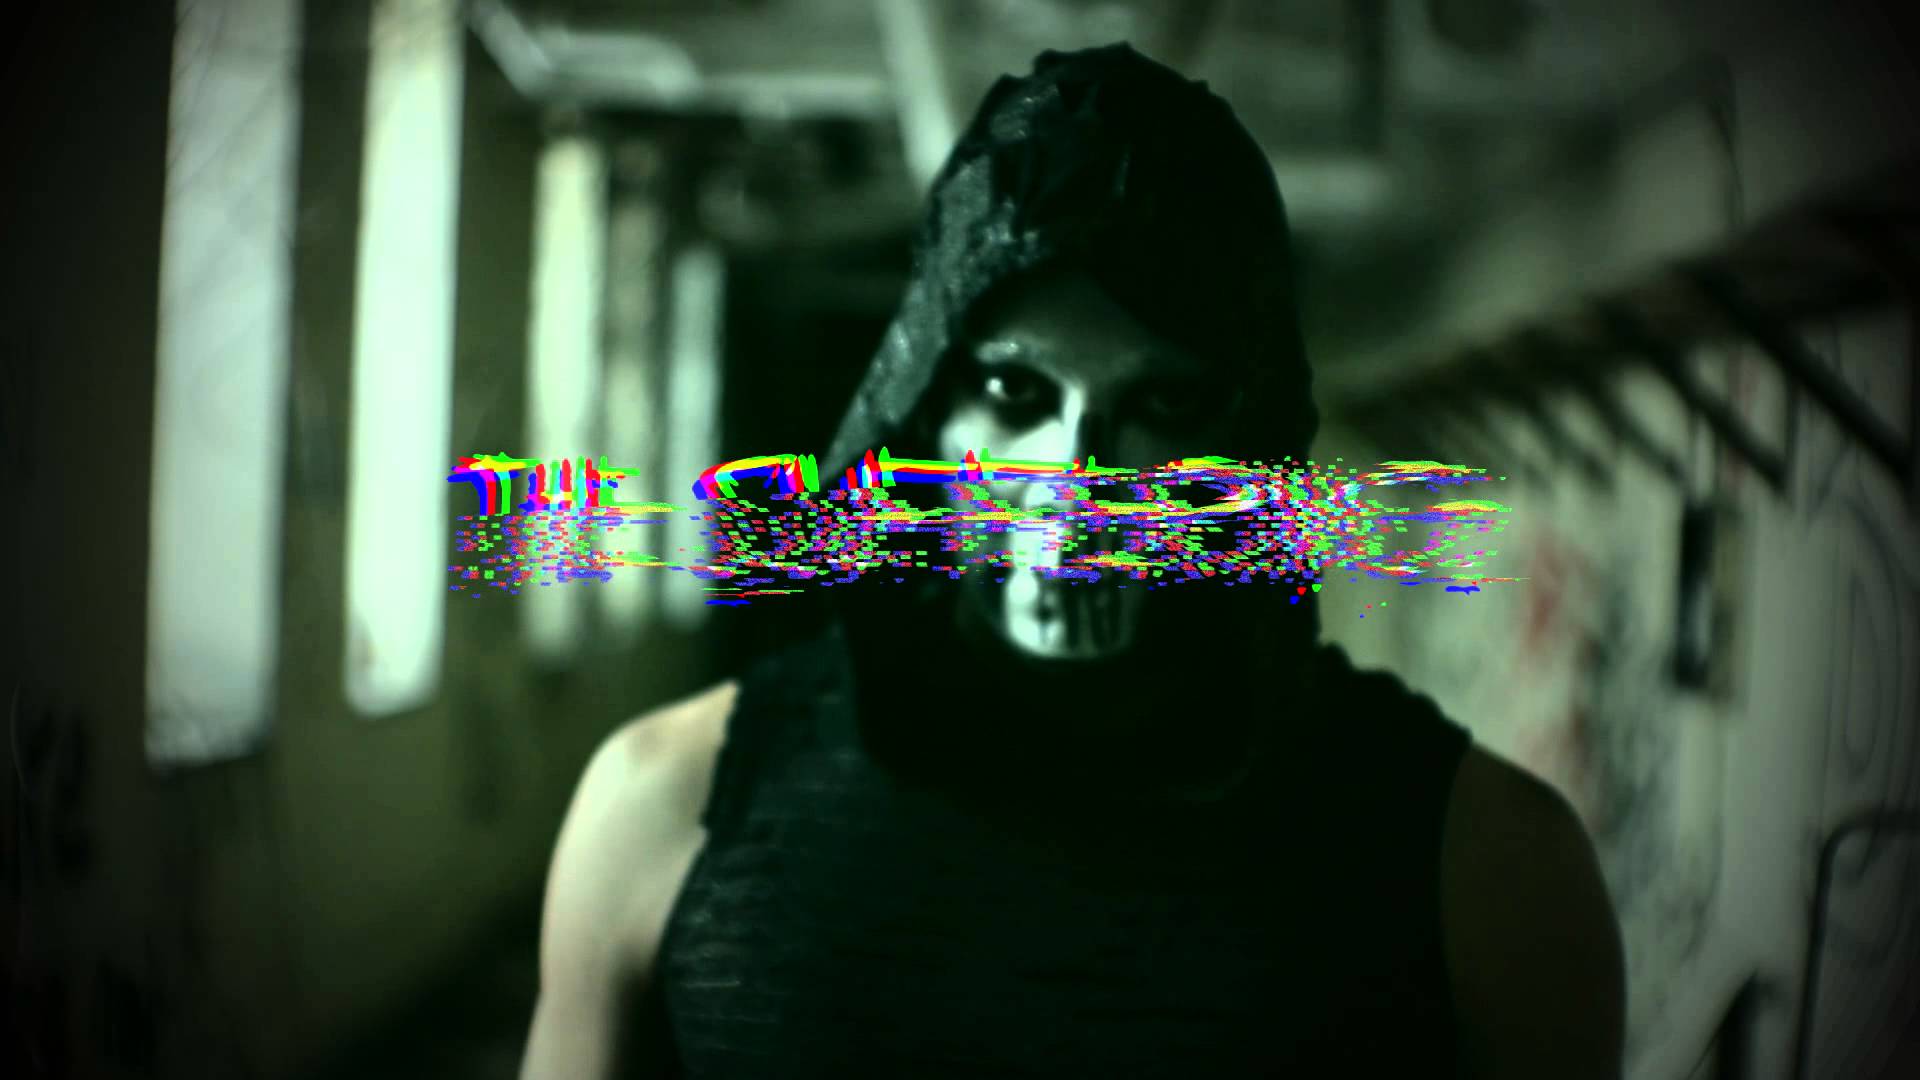 New music vid for “The Suffering” coming soon!